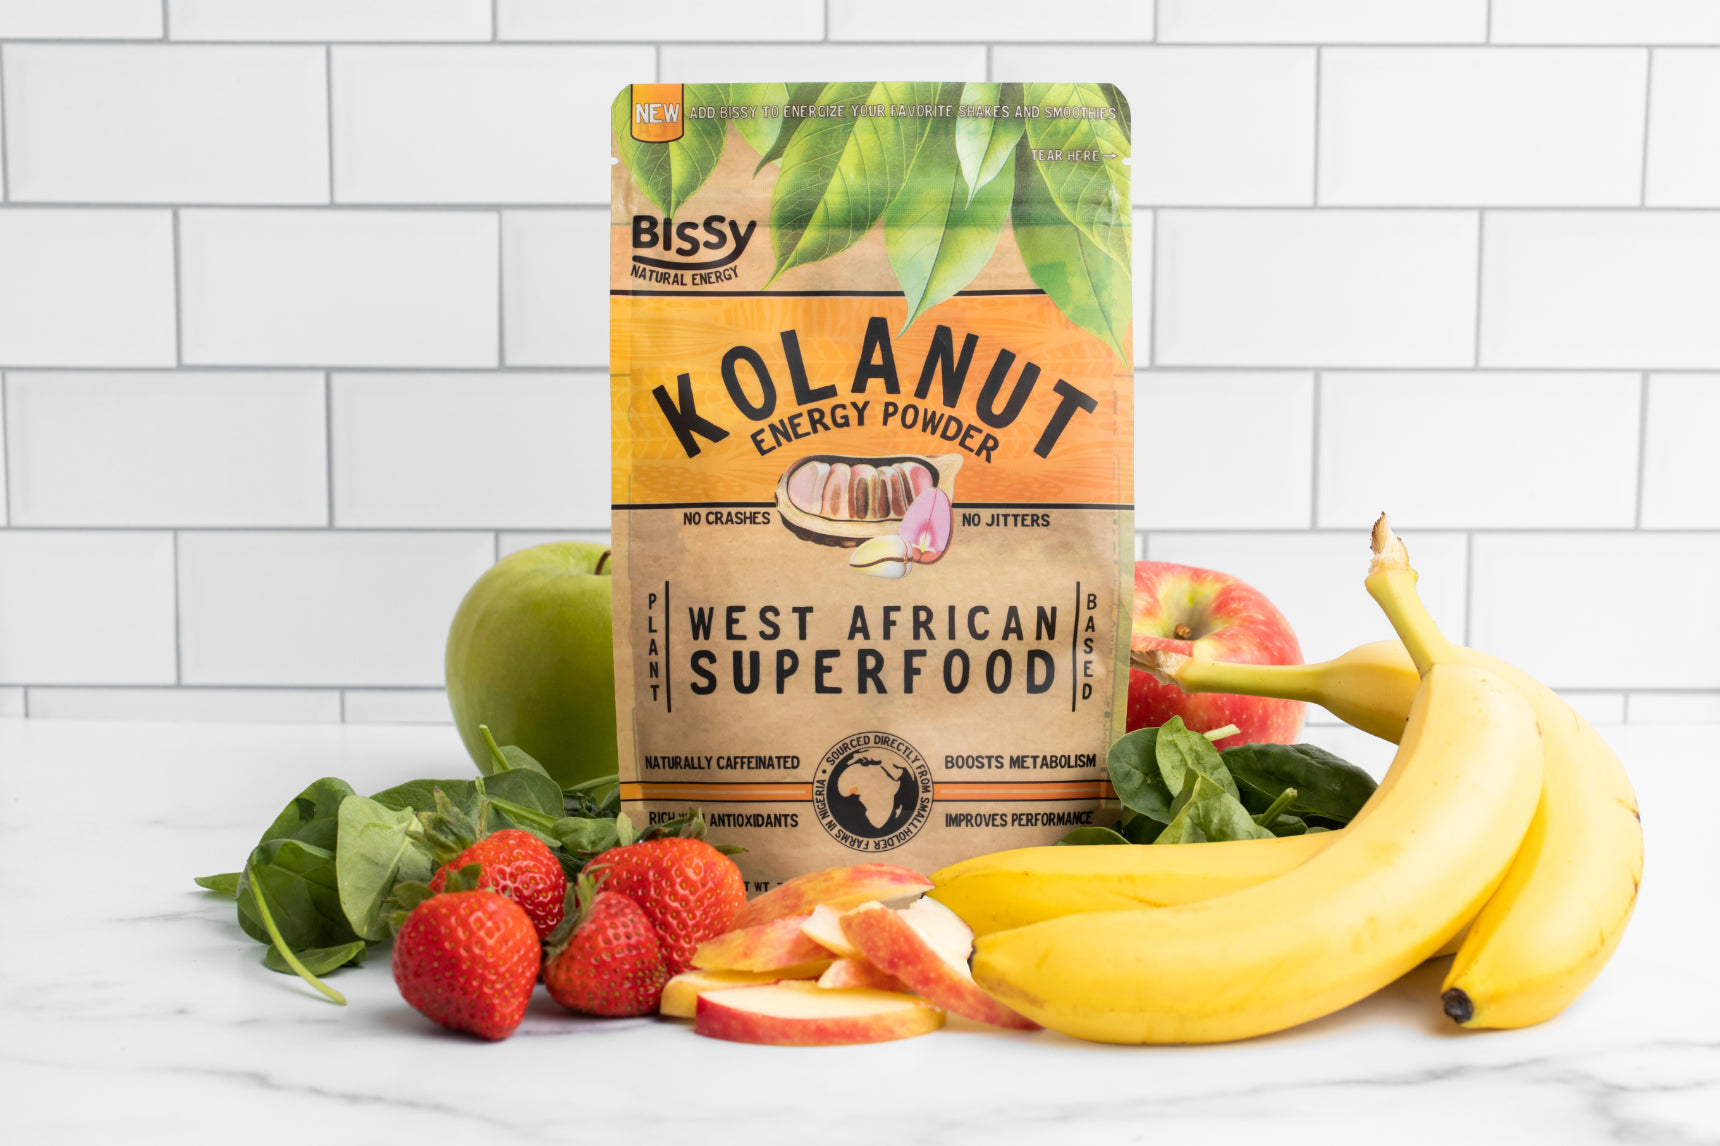 Kolanut Energy Powder by Bissy pictured with fresh fruits and vegetables ready to blend into a smoothie